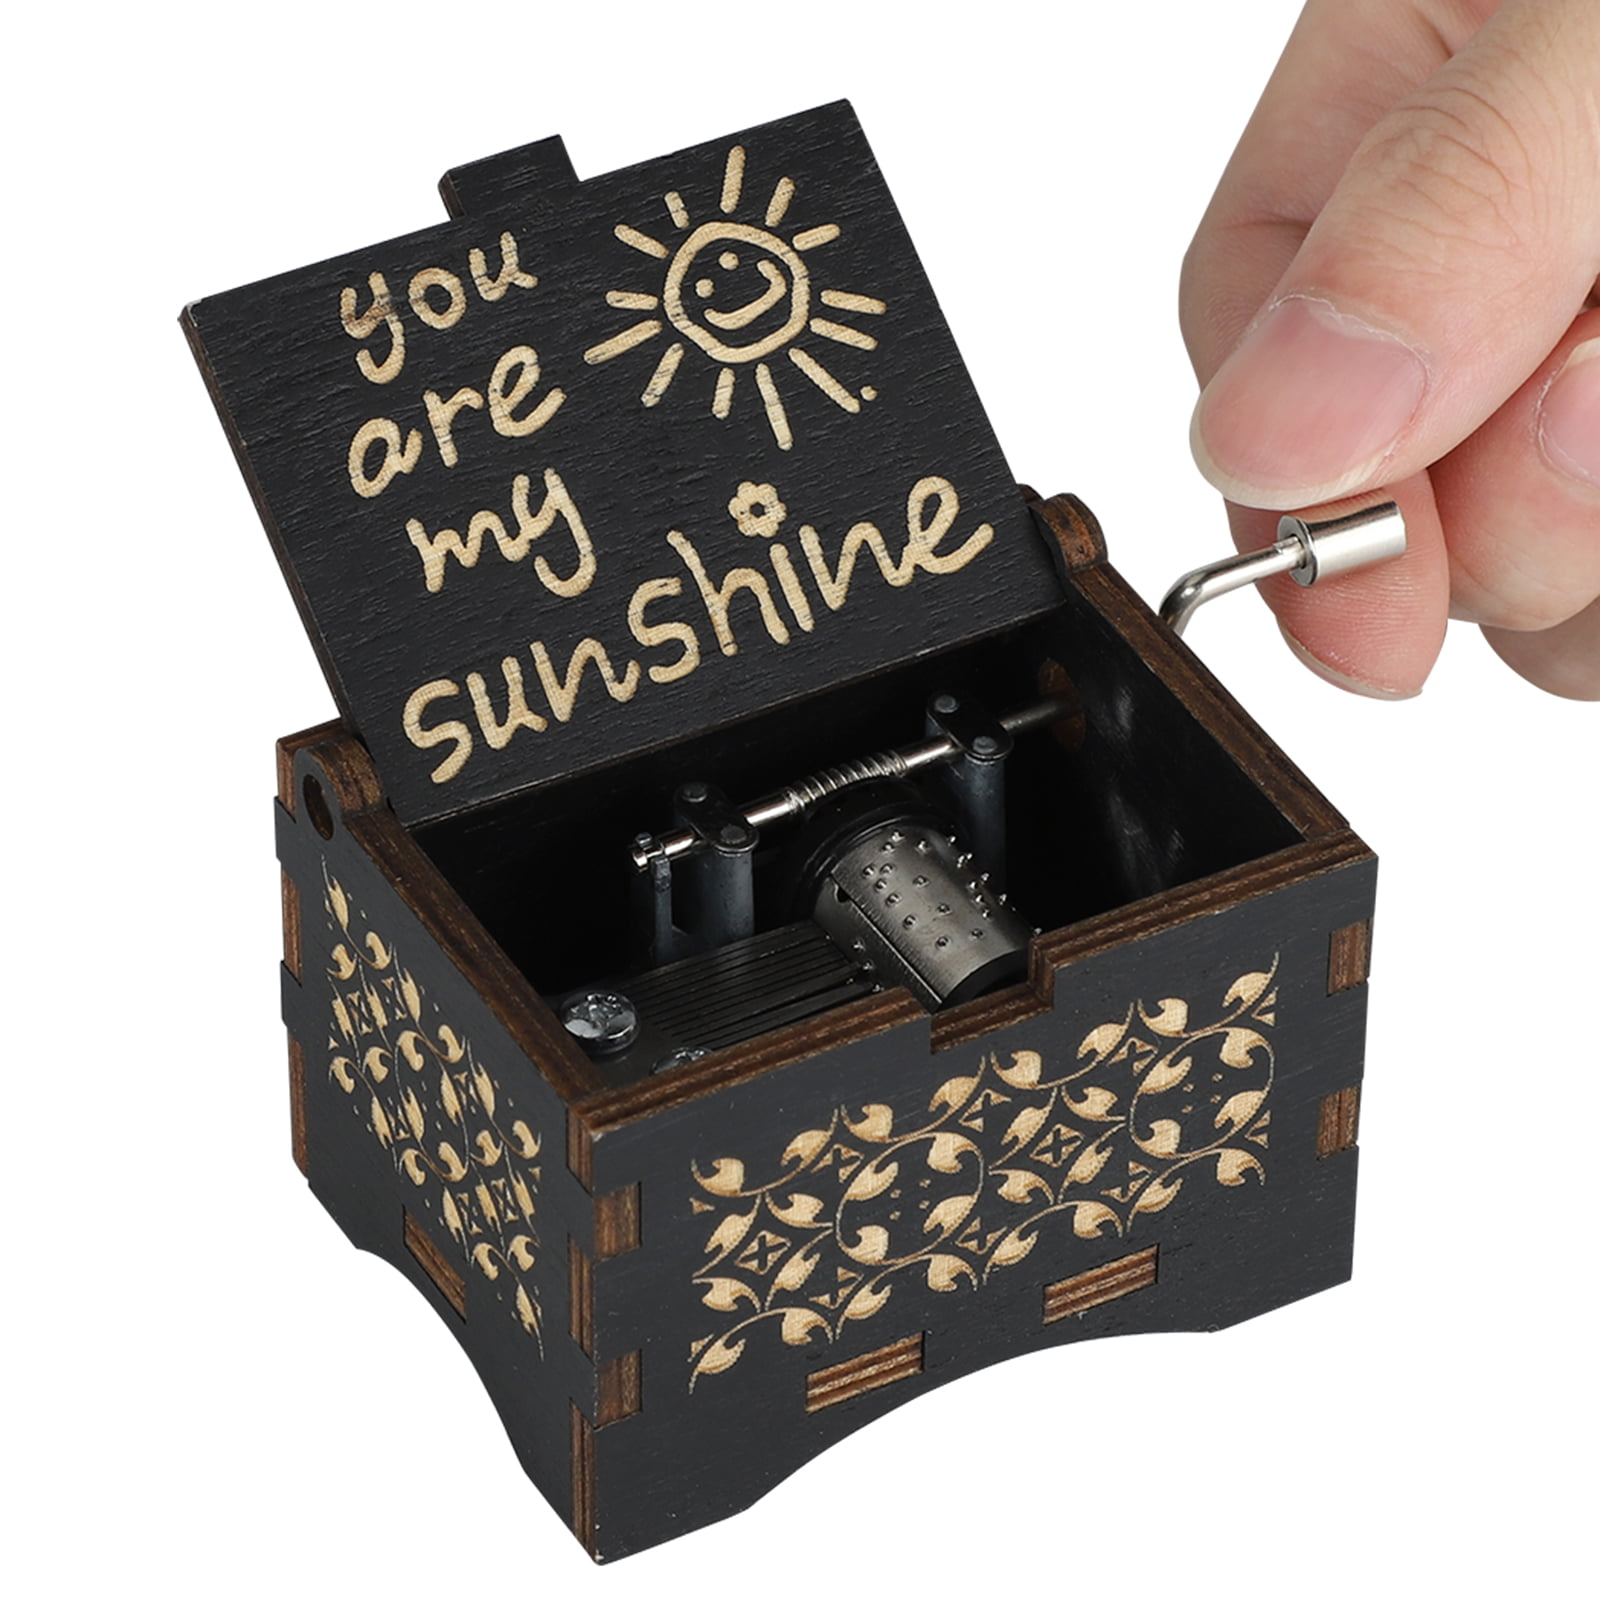 You are My Sunshine BOYFRIEND TO GIRLFRIEND Music Box Wood Wooden Engraved Vintage Hand Crank Musical Song Gift for Her Valentines Birthday